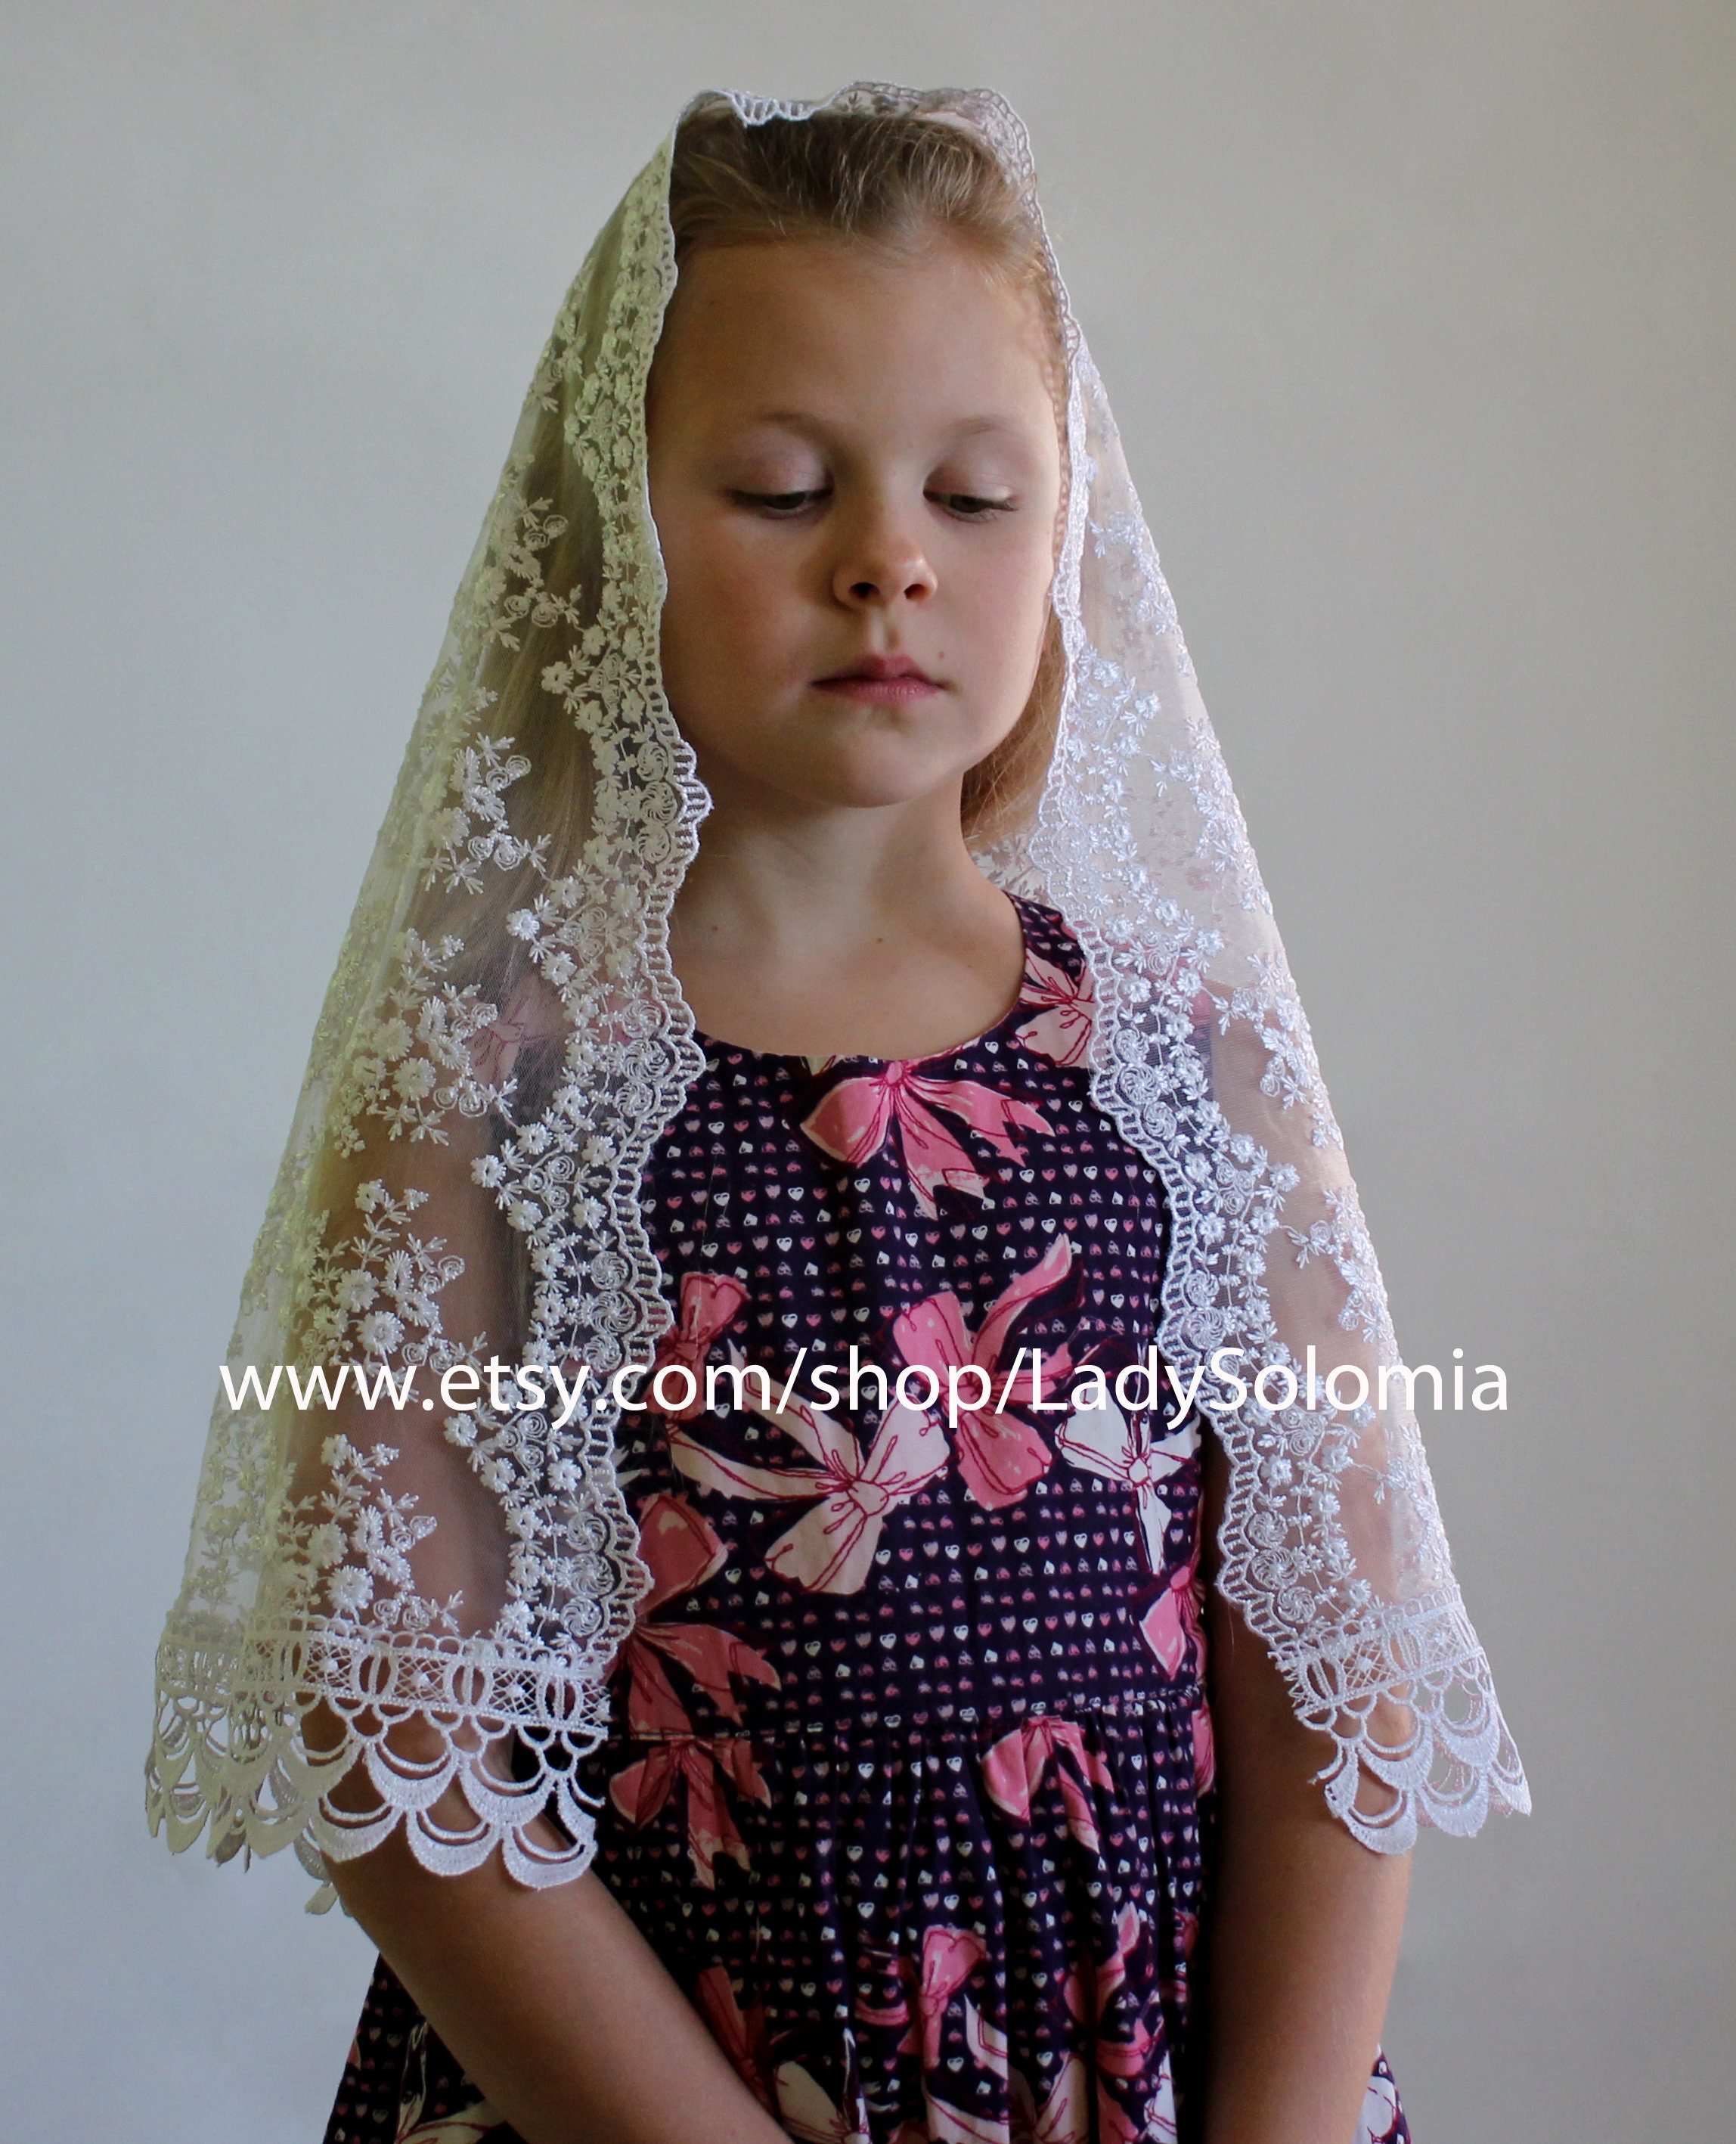 Lucia First Communion Veil for Girls